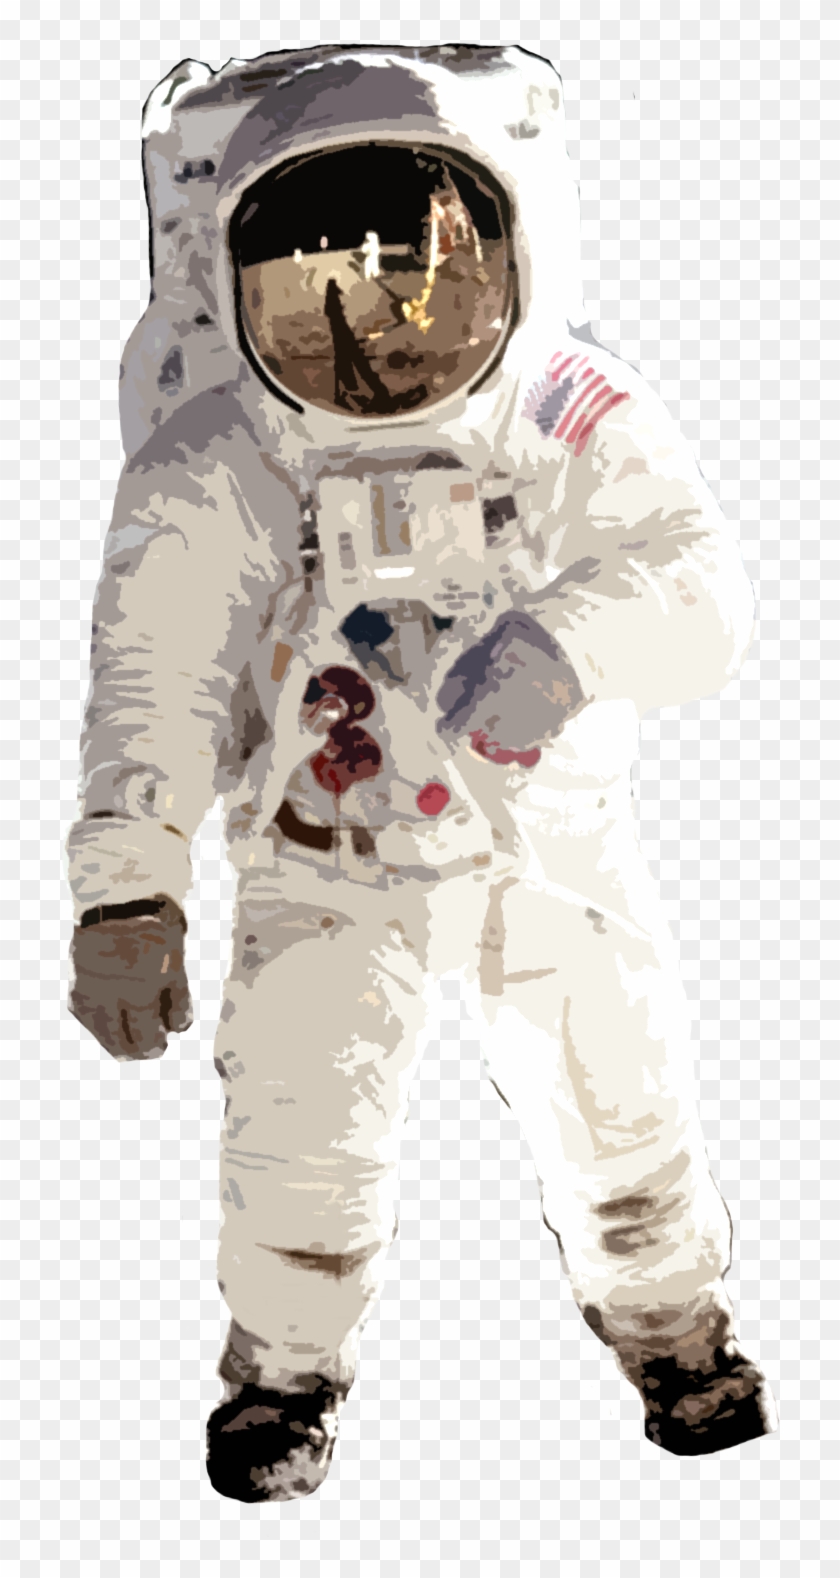 Maps - Astronaut Wall Stickers Clipart #3814859